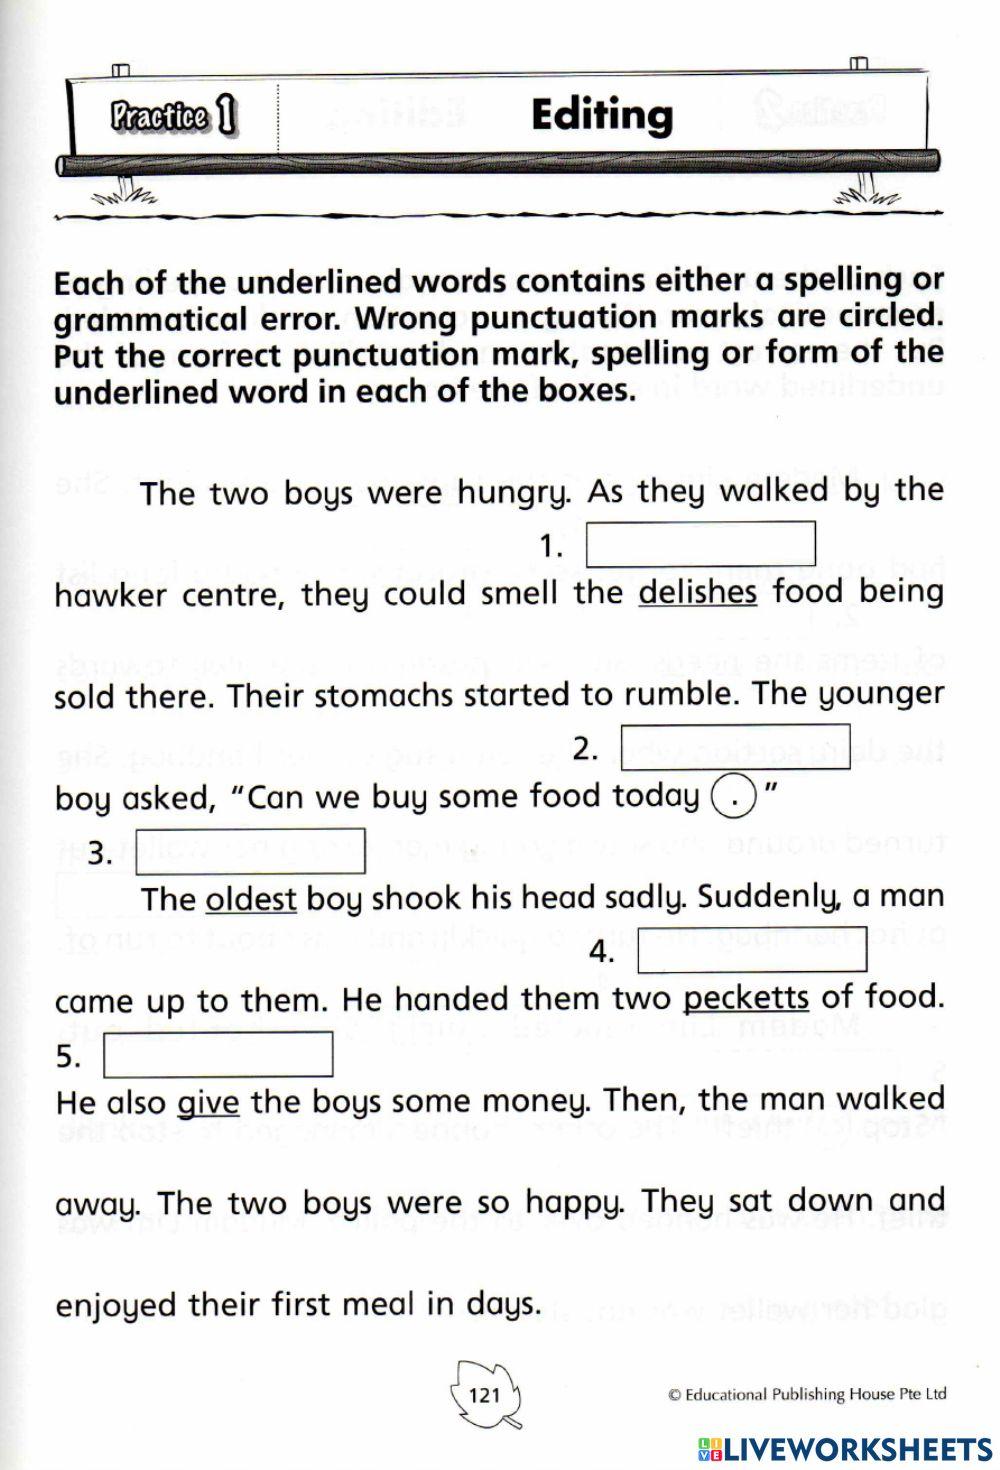 English-Practice 1-page 121